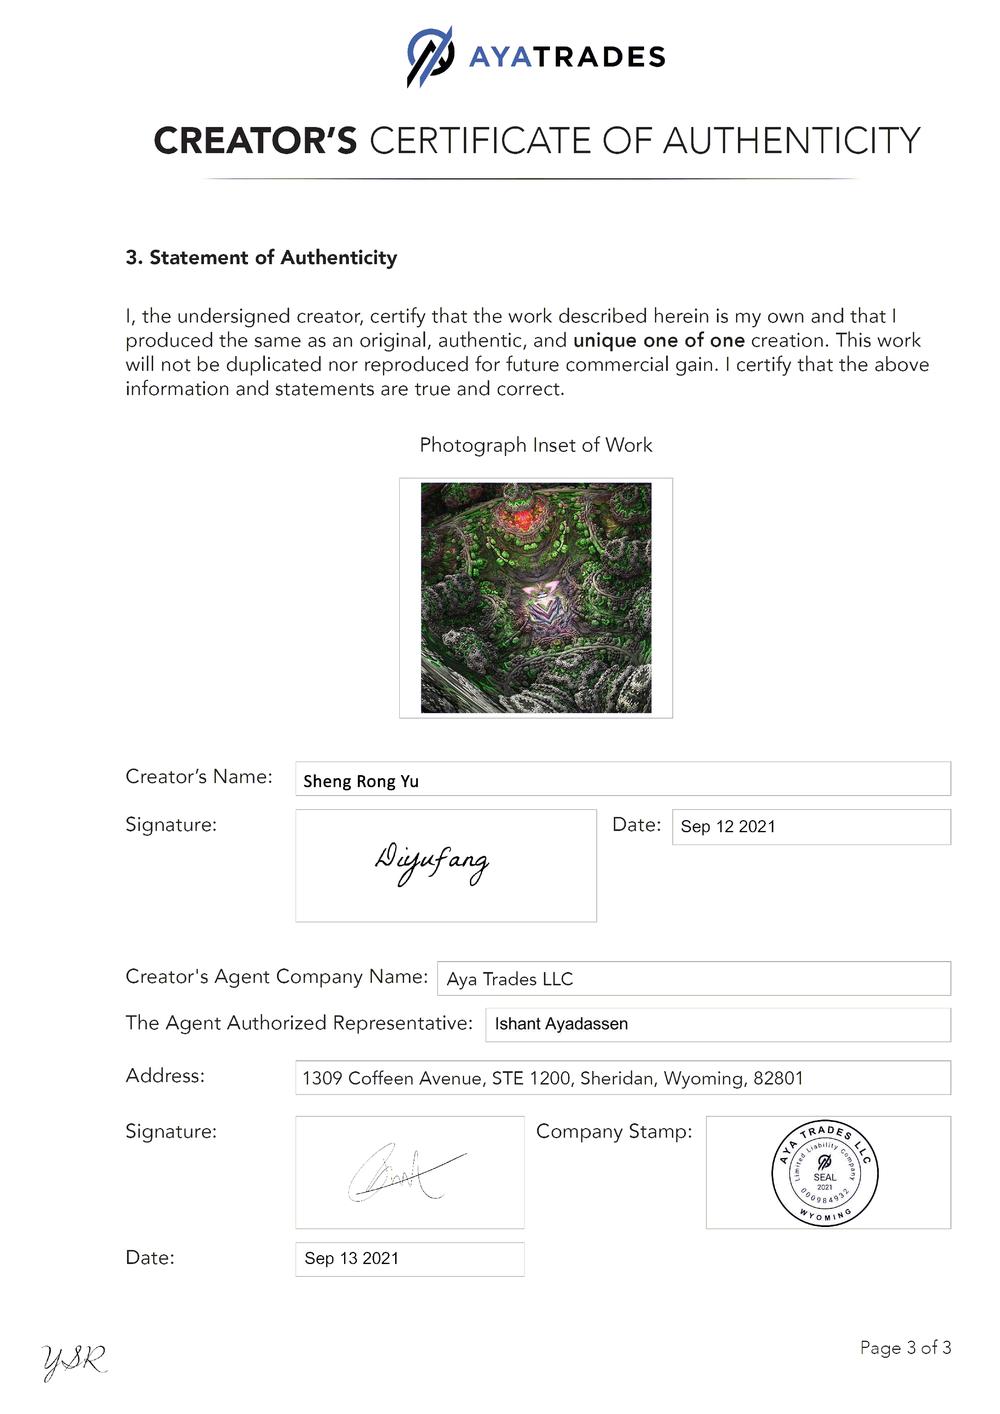 Certificate of Authenticity and Consignment - Emerald Soulstone